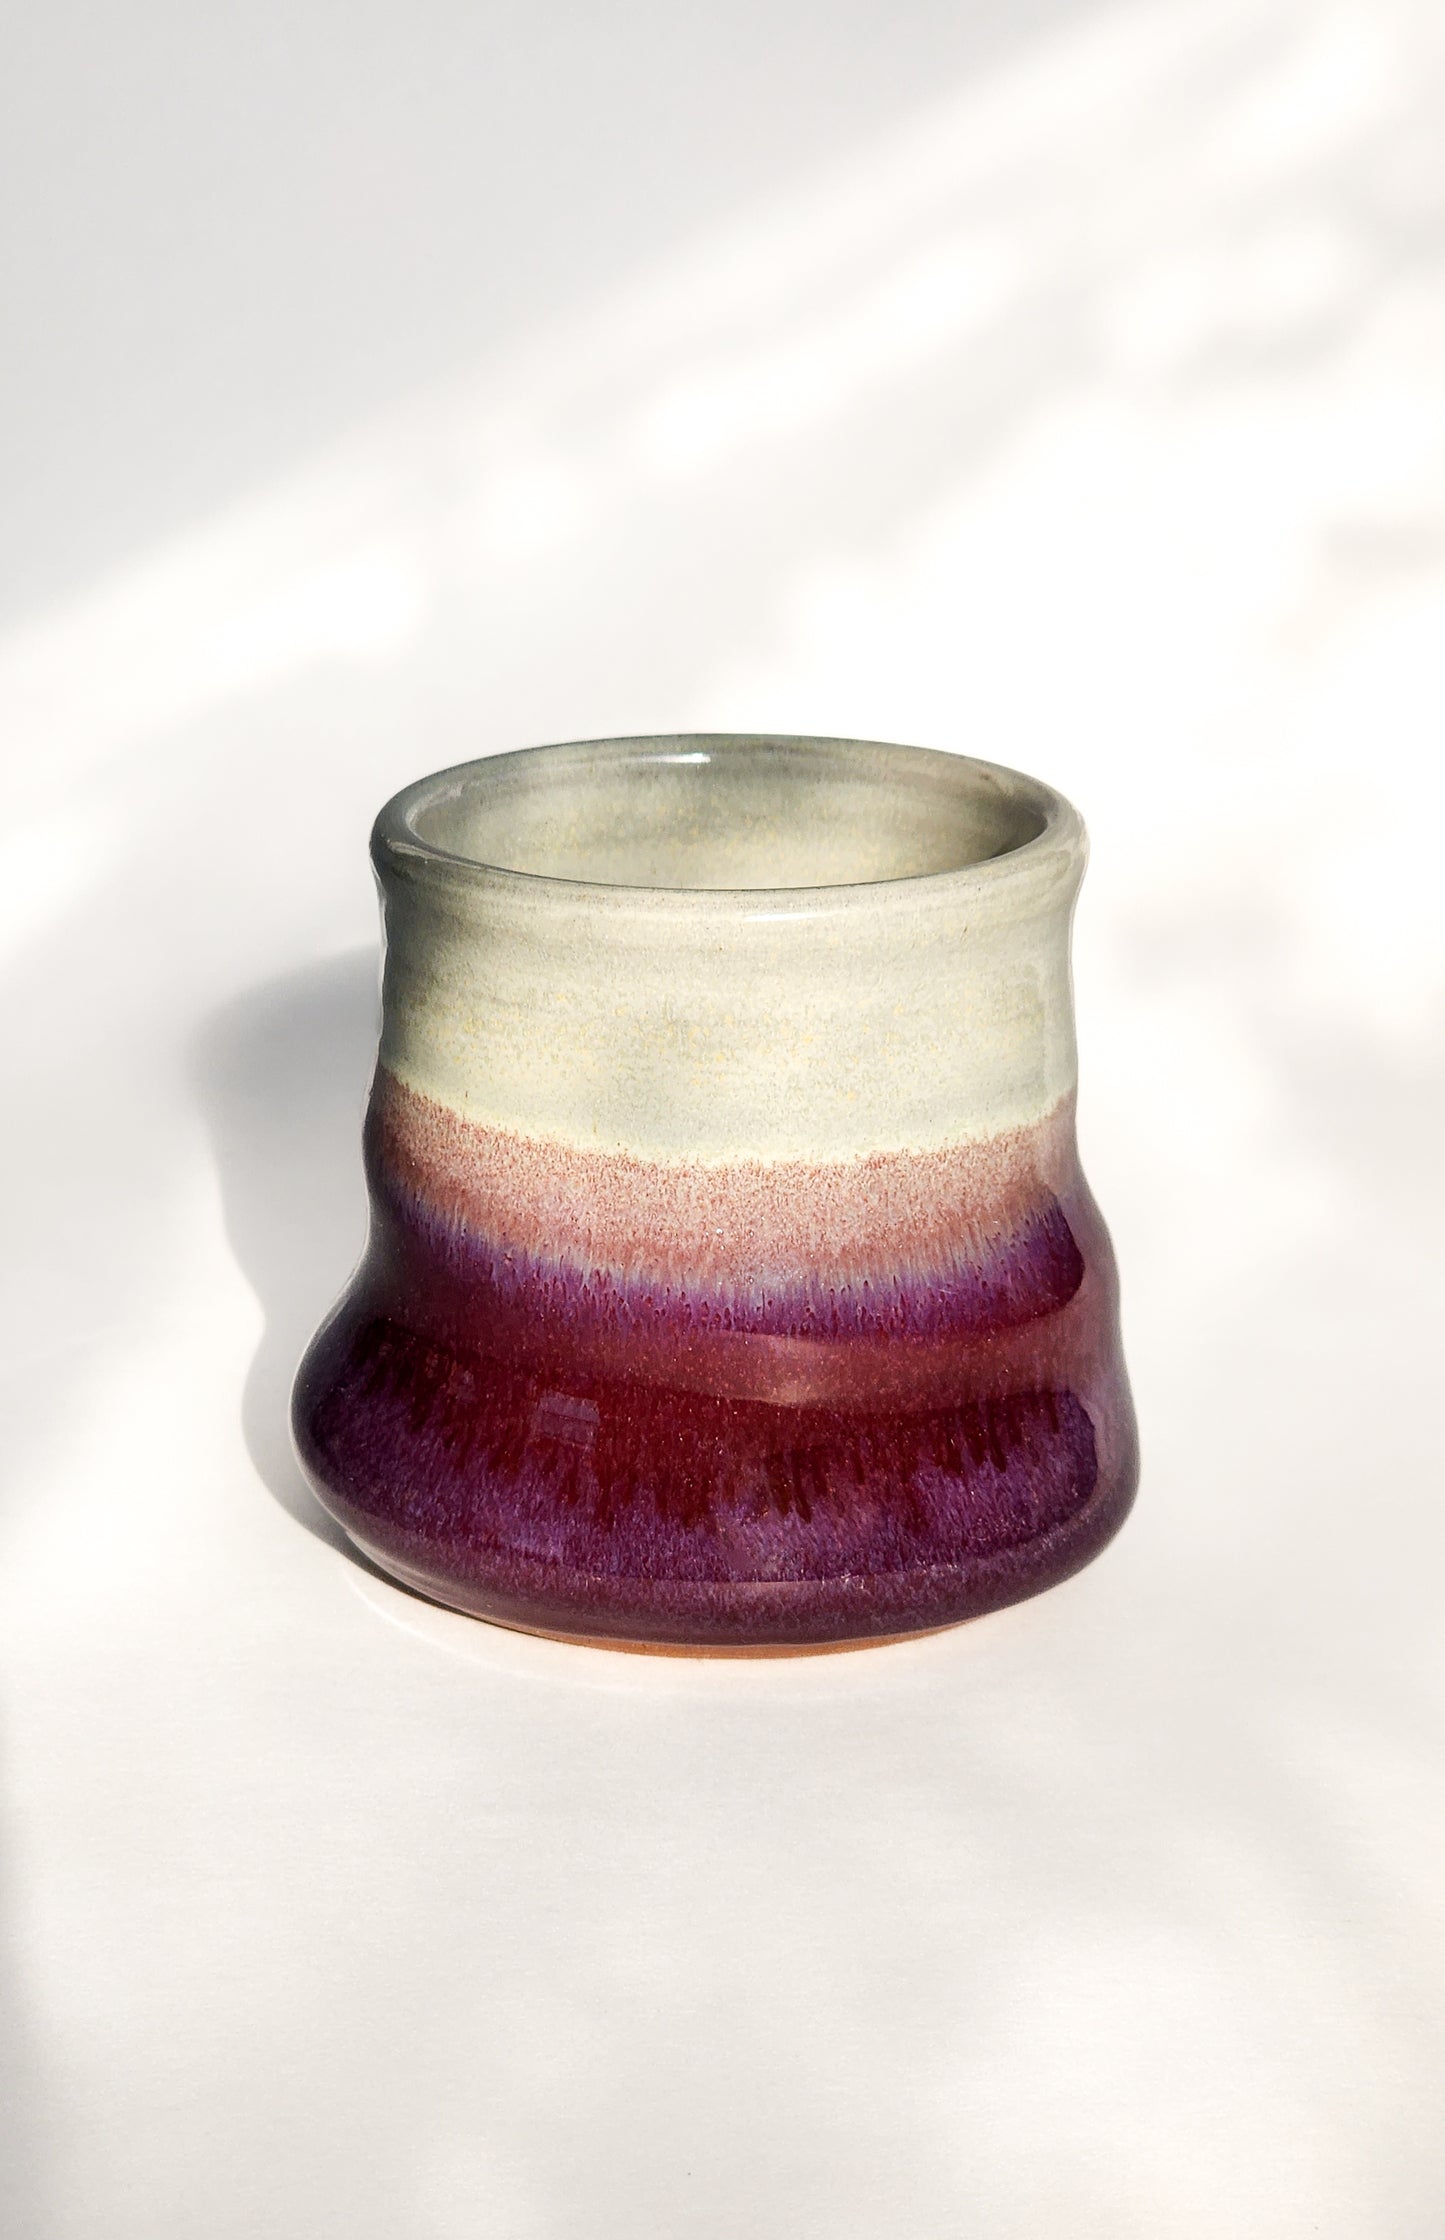 Image: Clinton Pottery's 8 oz Small Tumbler in Red/Magenta – A visually appealing addition with a cool, curvy design for a comfortable grip. This machine washable tumbler, crafted with care, adds contemporary elegance. The vibrant Red/Magenta color brings a touch of boldness, reminiscent of passion and artistic expression.